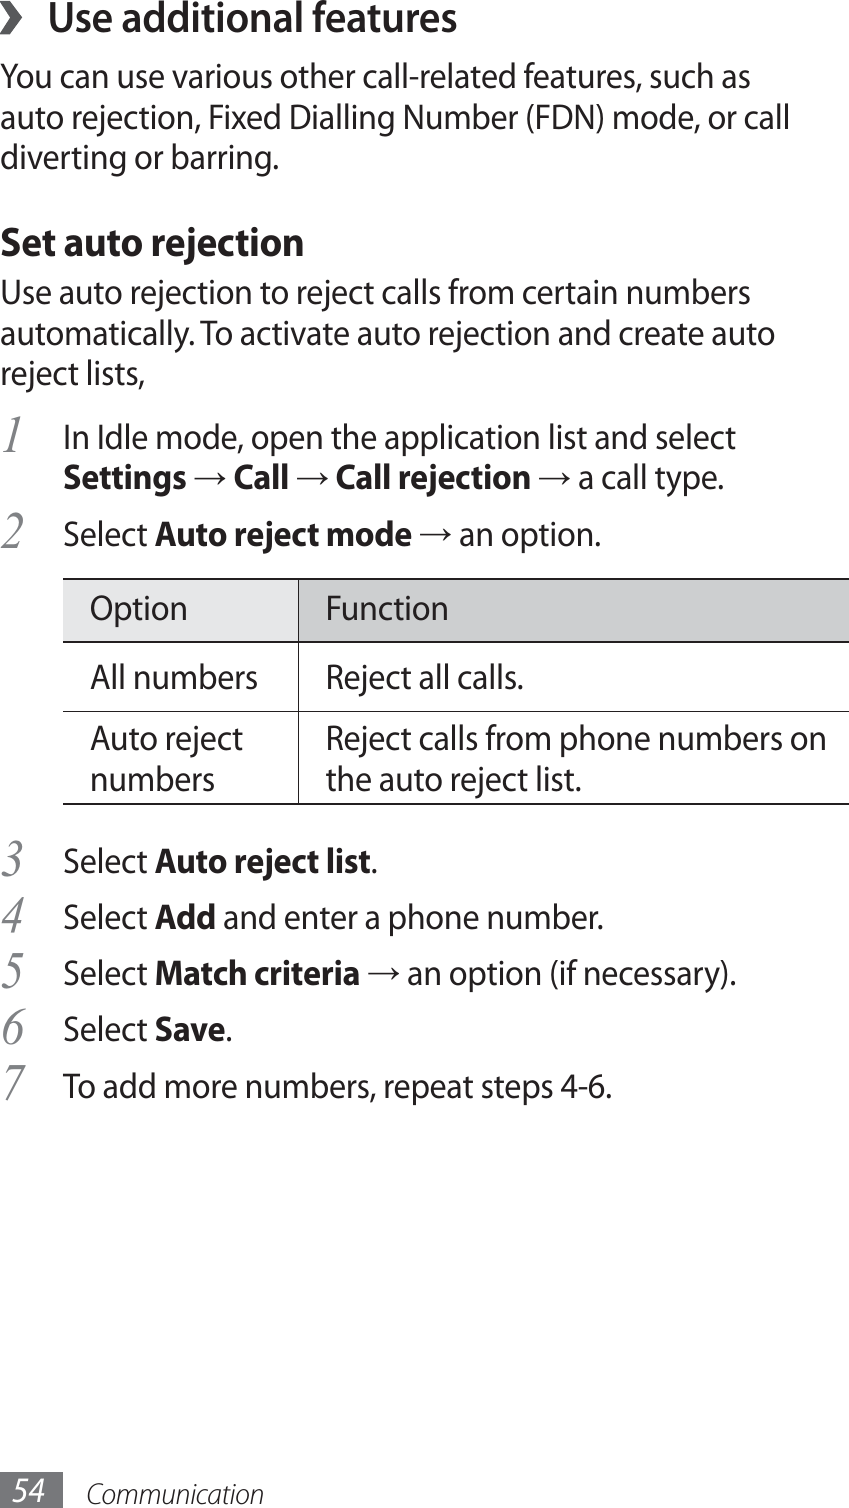 Communication54Use additional features ›You can use various other call-related features, such as auto rejection, Fixed Dialling Number (FDN) mode, or call diverting or barring.Set auto rejectionUse auto rejection to reject calls from certain numbers automatically. To activate auto rejection and create auto reject lists,In Idle mode, open the application list and select 1 Settings → Call → Call rejection → a call type.Select 2 Auto reject mode → an option.Option FunctionAll numbers Reject all calls.Auto reject numbersReject calls from phone numbers on the auto reject list.Select 3 Auto reject list.Select 4 Add and enter a phone number.Select 5 Match criteria → an option (if necessary).Select 6 Save.To add more numbers, repeat steps 4-6.7 